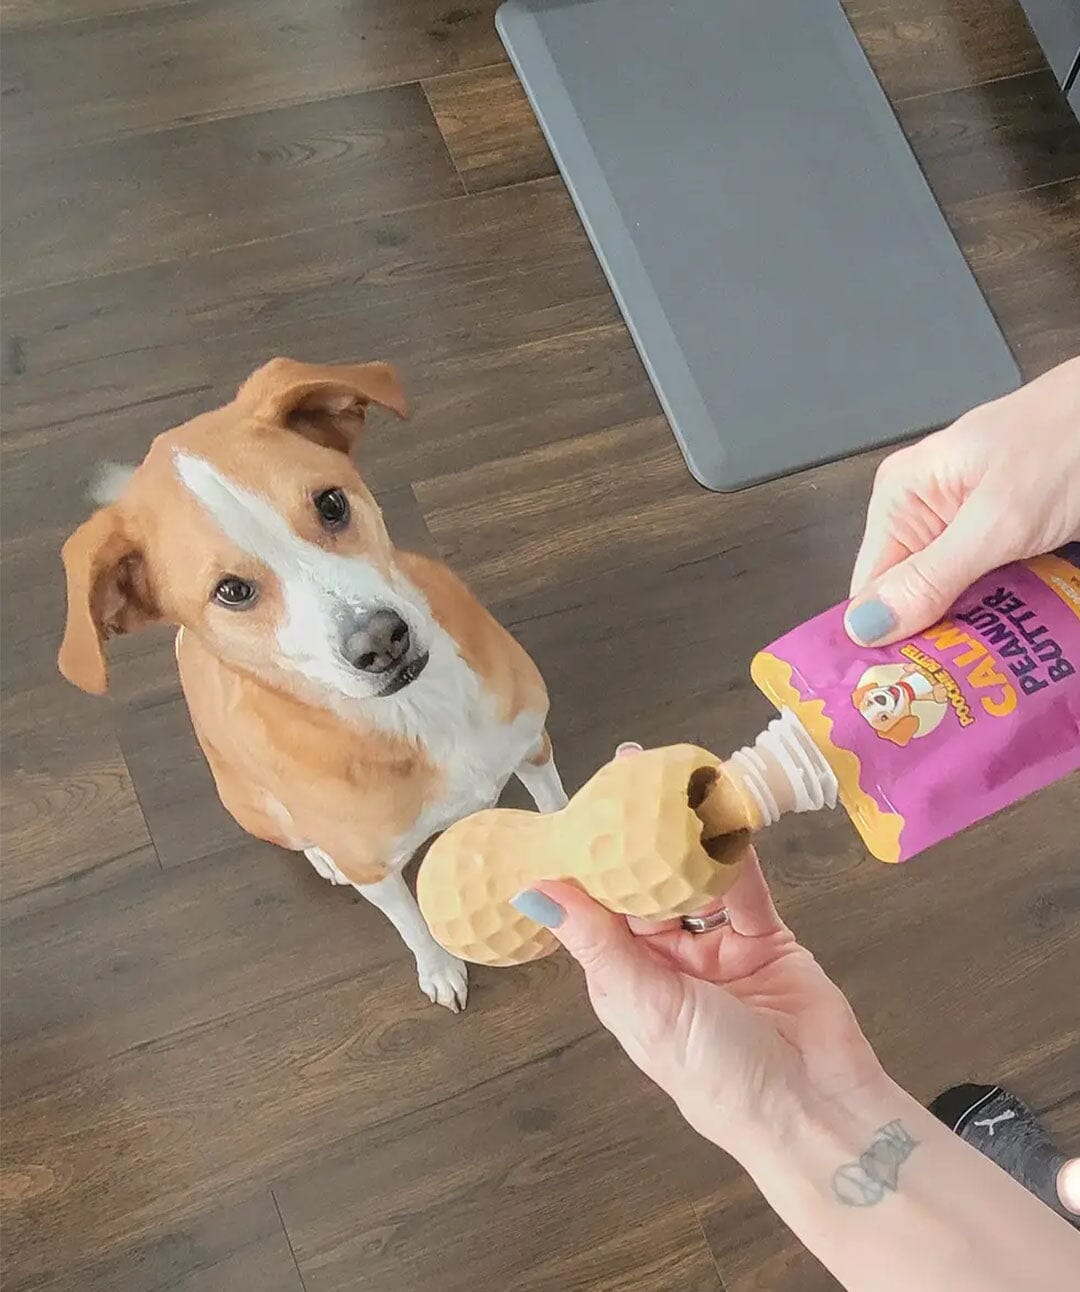 Poochie Butter Calming Peanut Butter Dog Treat – Rover Store